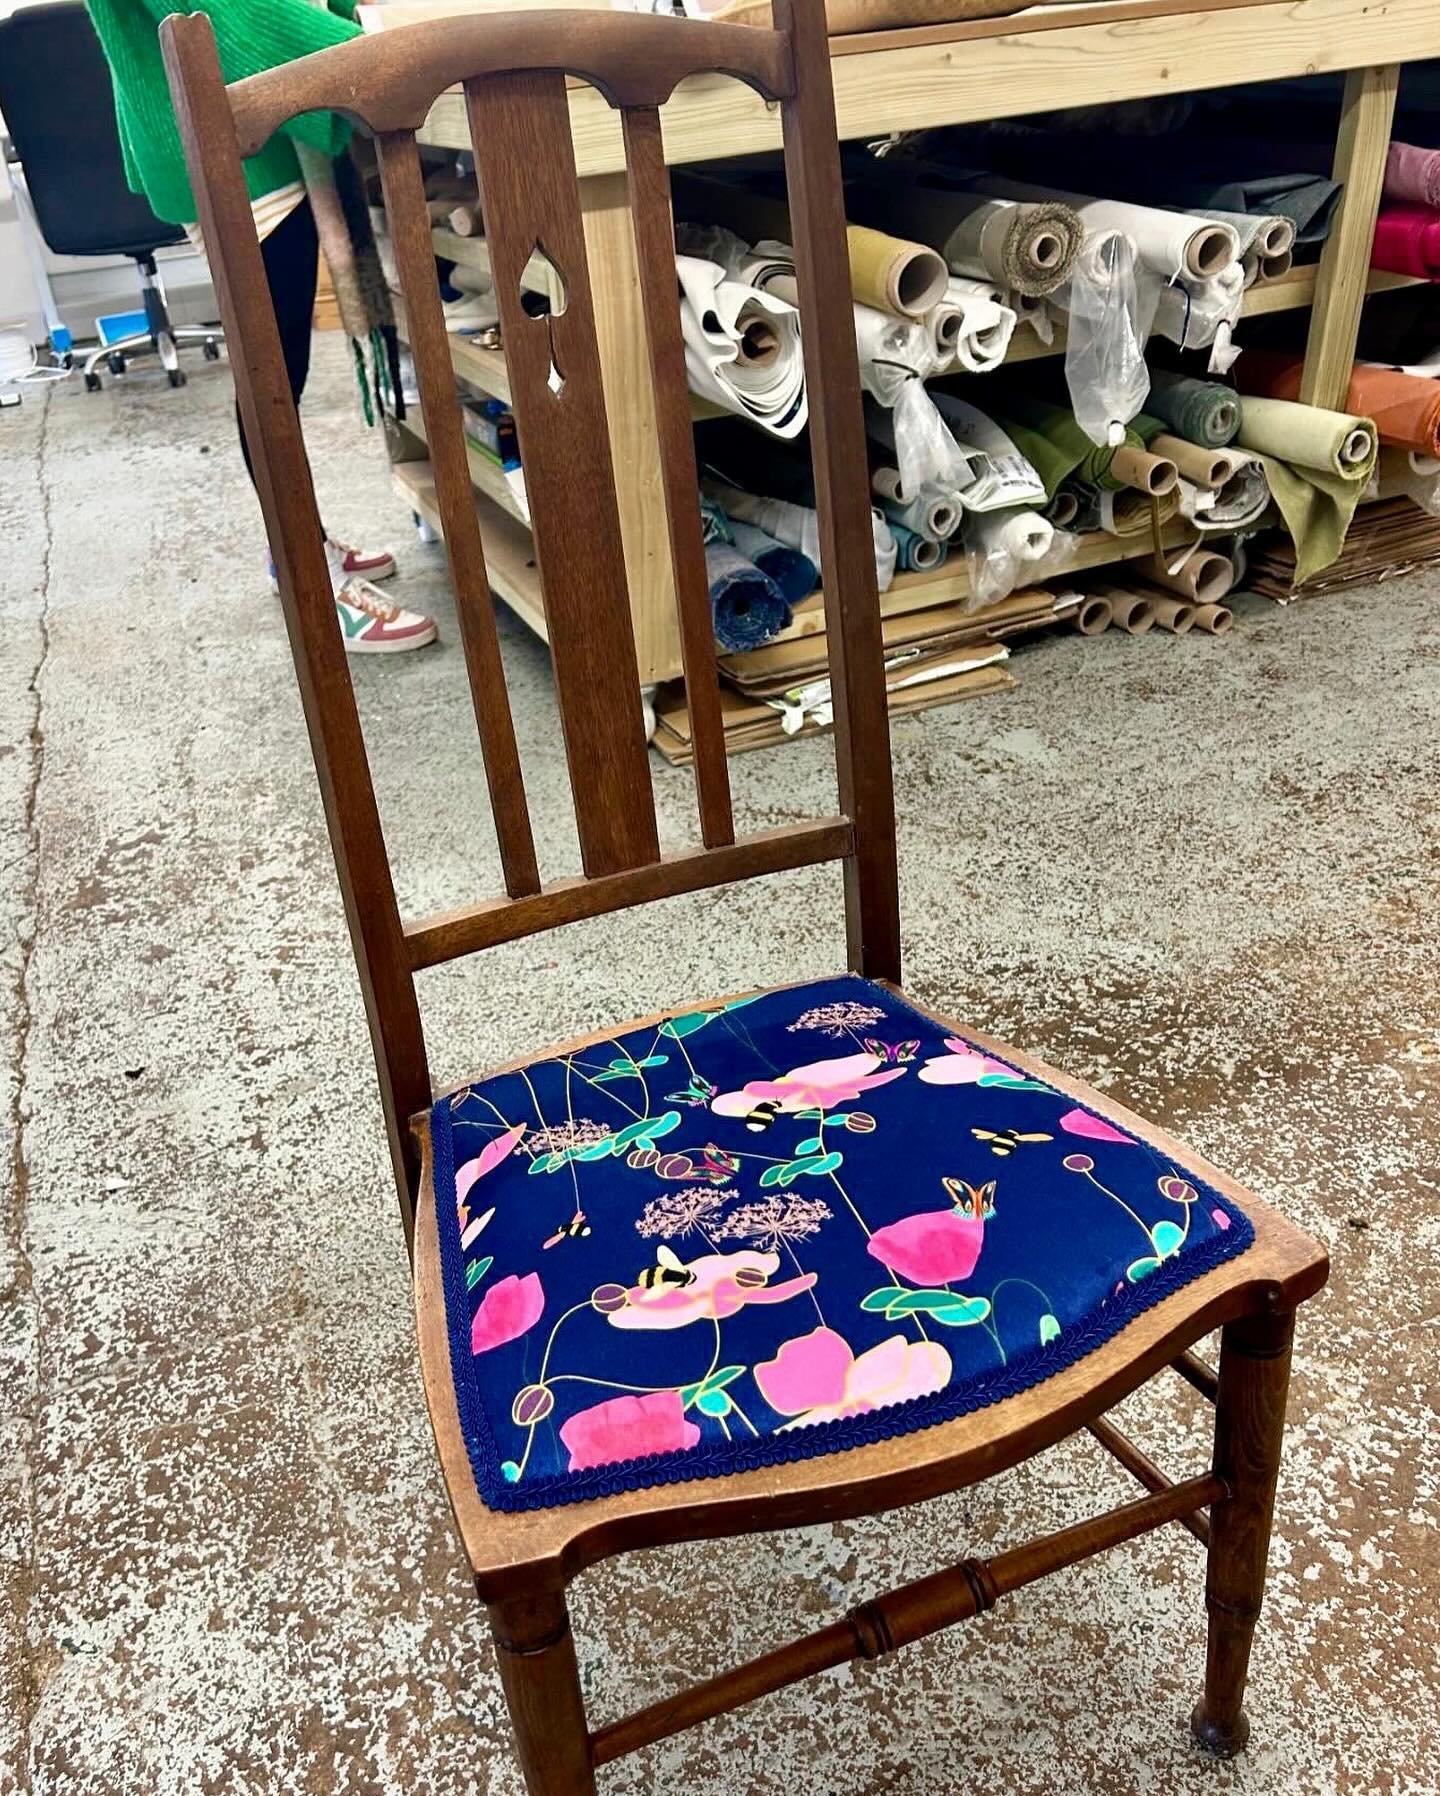 I was sent these fabulous pics by avery proud mum who had gifted her 10 year old daughter an upholstery session with @dawnhoughtonupholstery 

The daughter chose my fabric design from Dawn and this is what she upholstered. I think it&rsquo;s fabulous